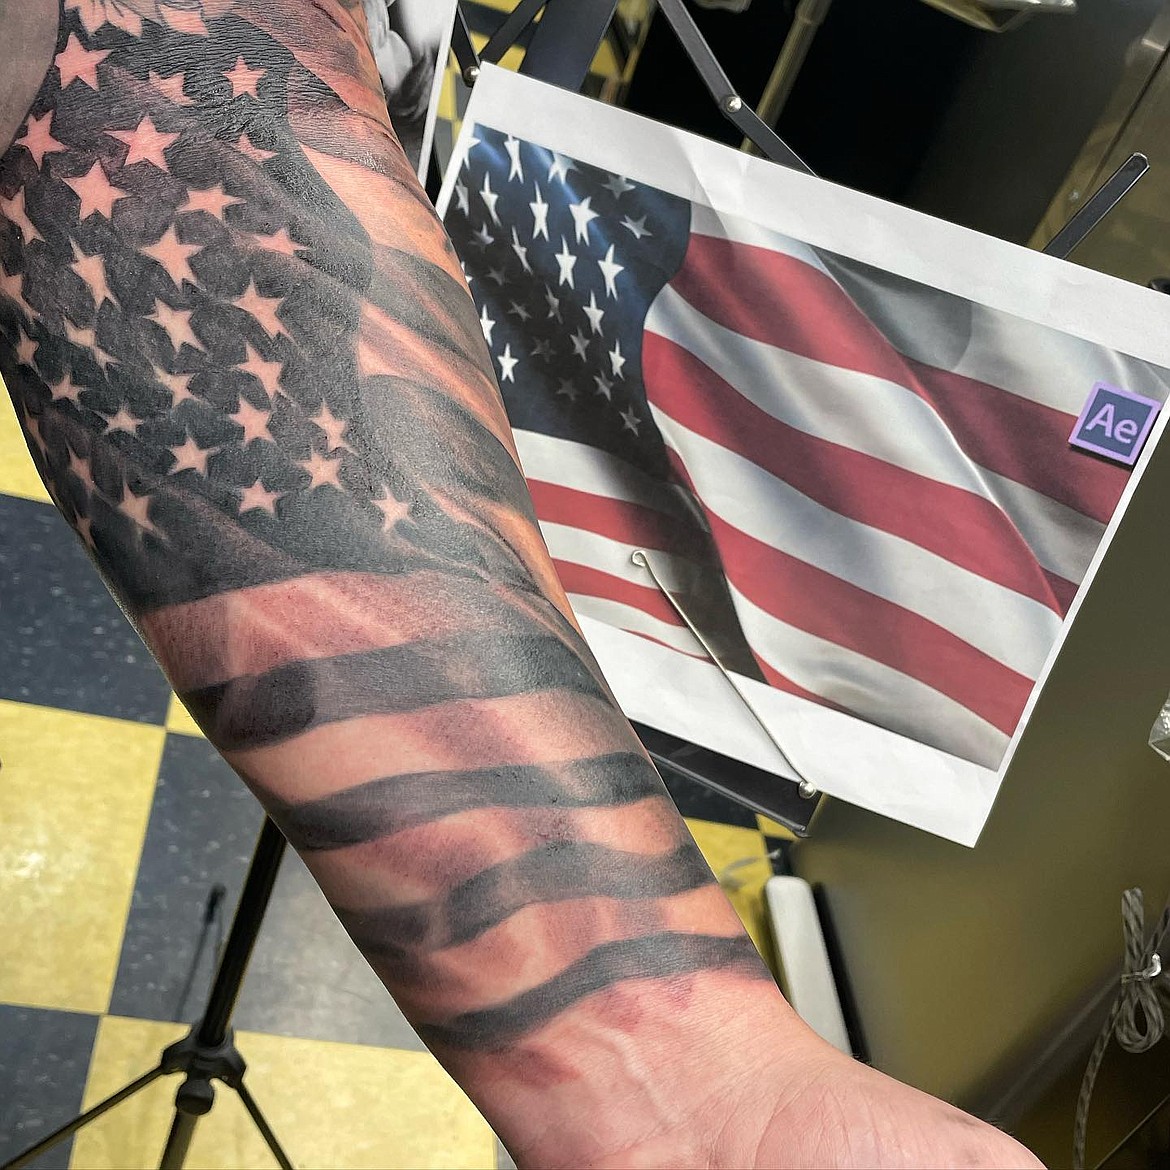 A flag tattoo completed on Oct. 26.